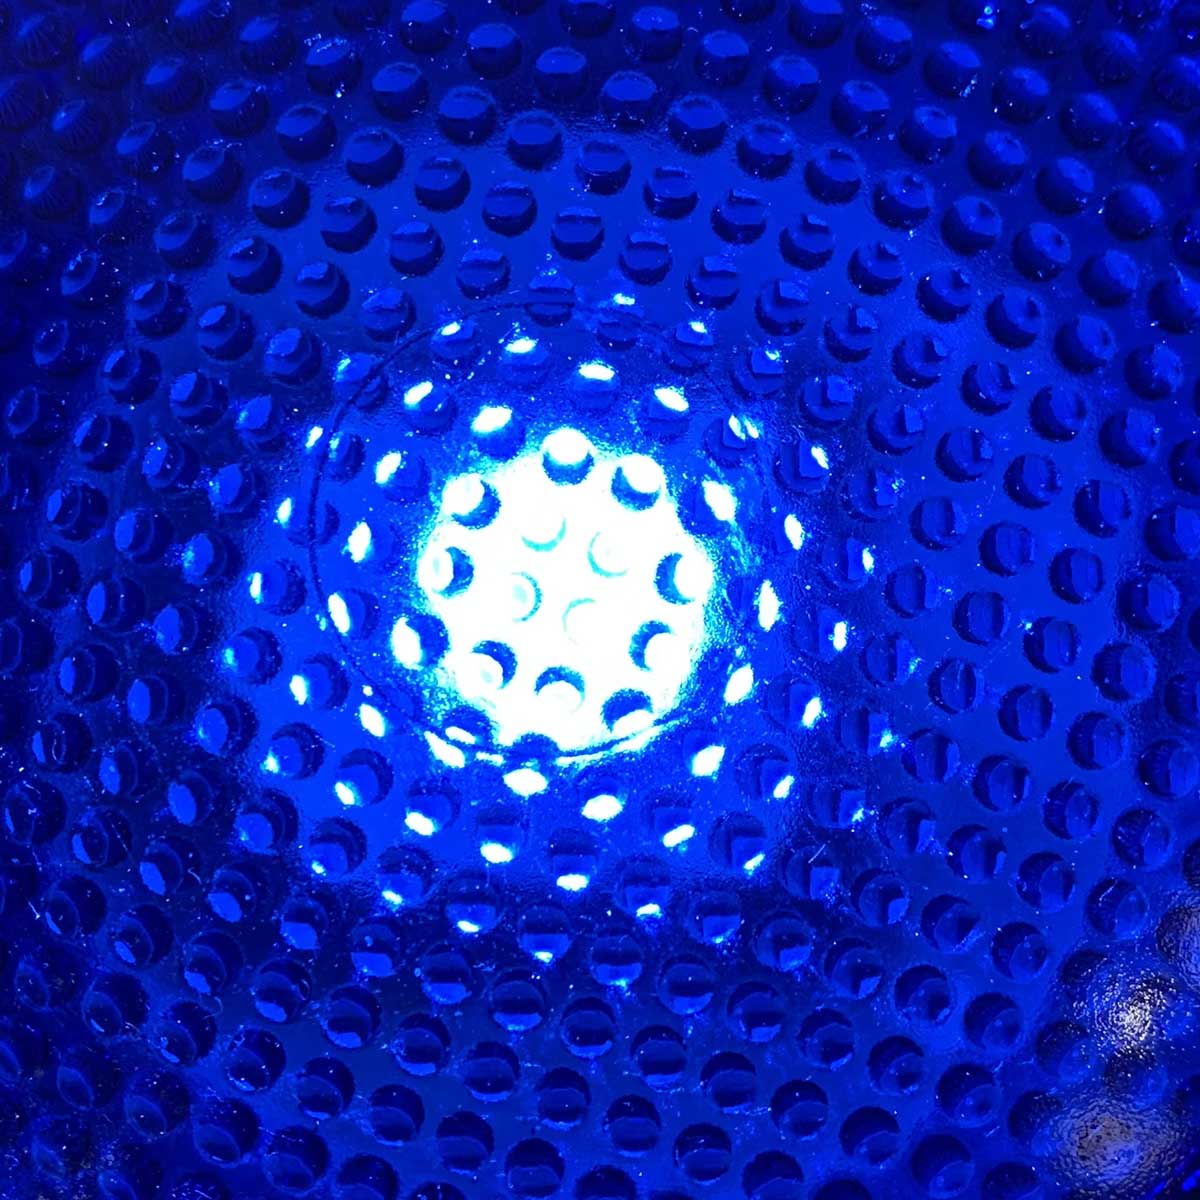 Close-up of the blue glass lens on a Thorn taxiway light.